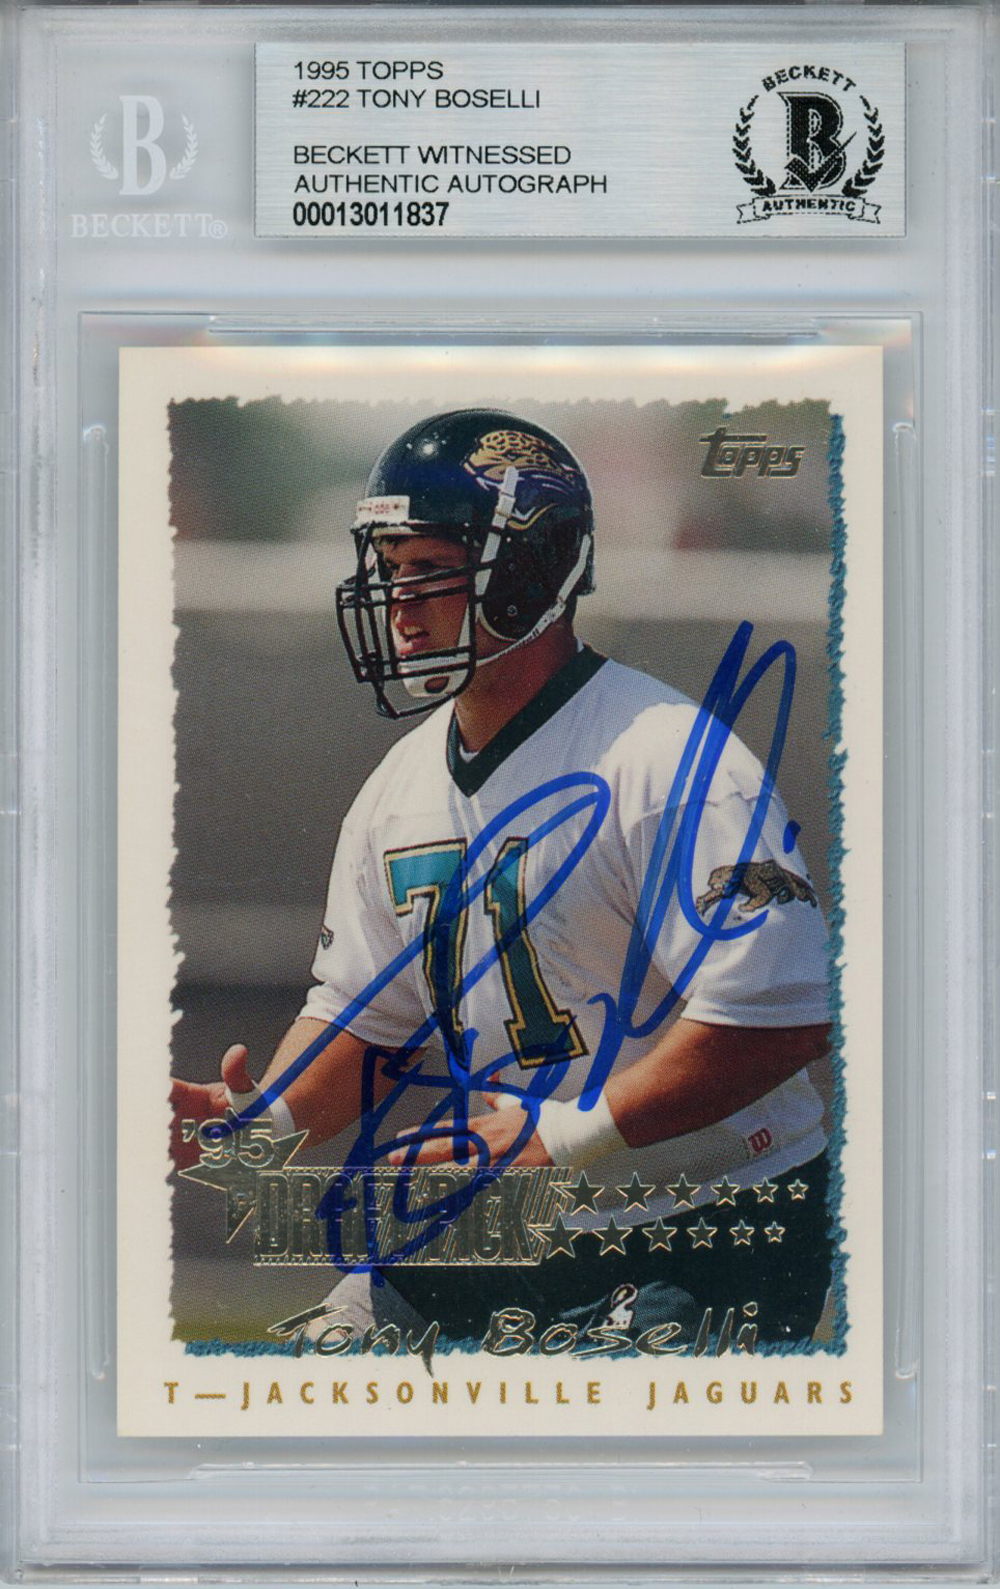 Tony Boselli Autographed/Signed 1995 Topps #222 Rookie Card BAS Slab